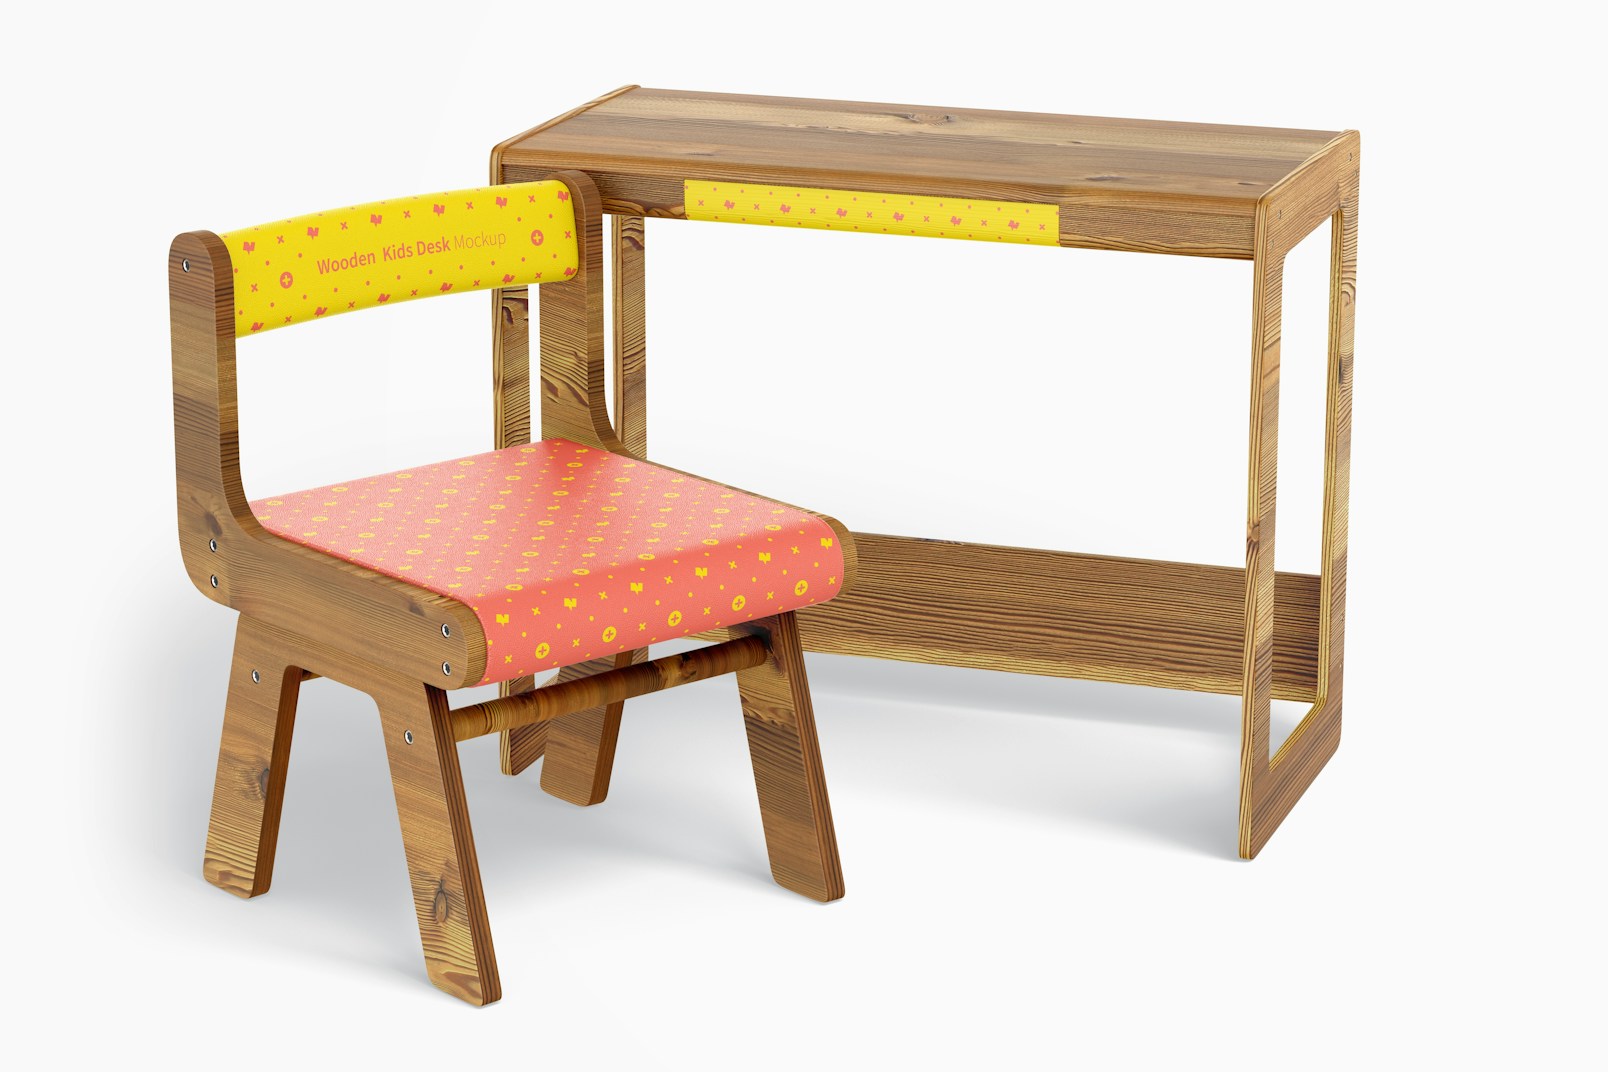 Wooden Kids Desk with Chair Mockup